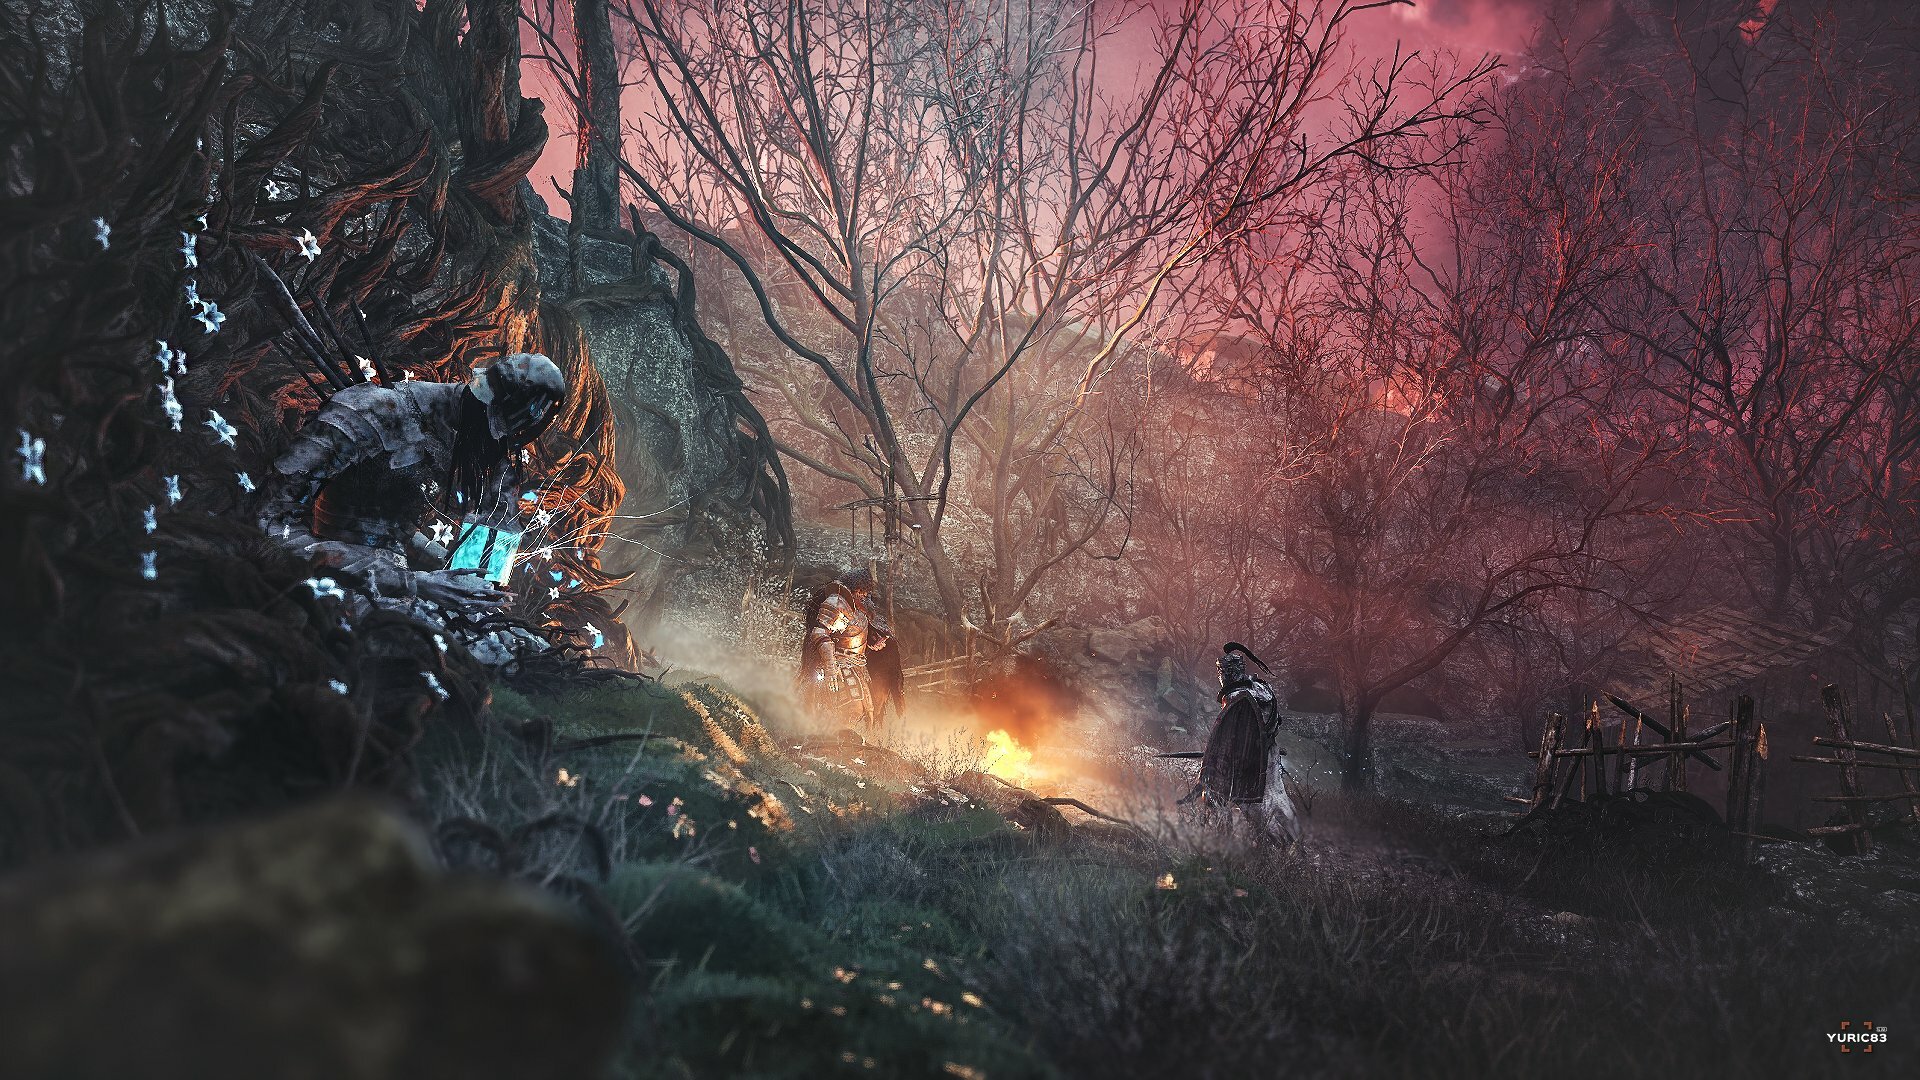 Lords of the Fallen October 14 patch notes: PC optimization, balance  changes & more - Dexerto